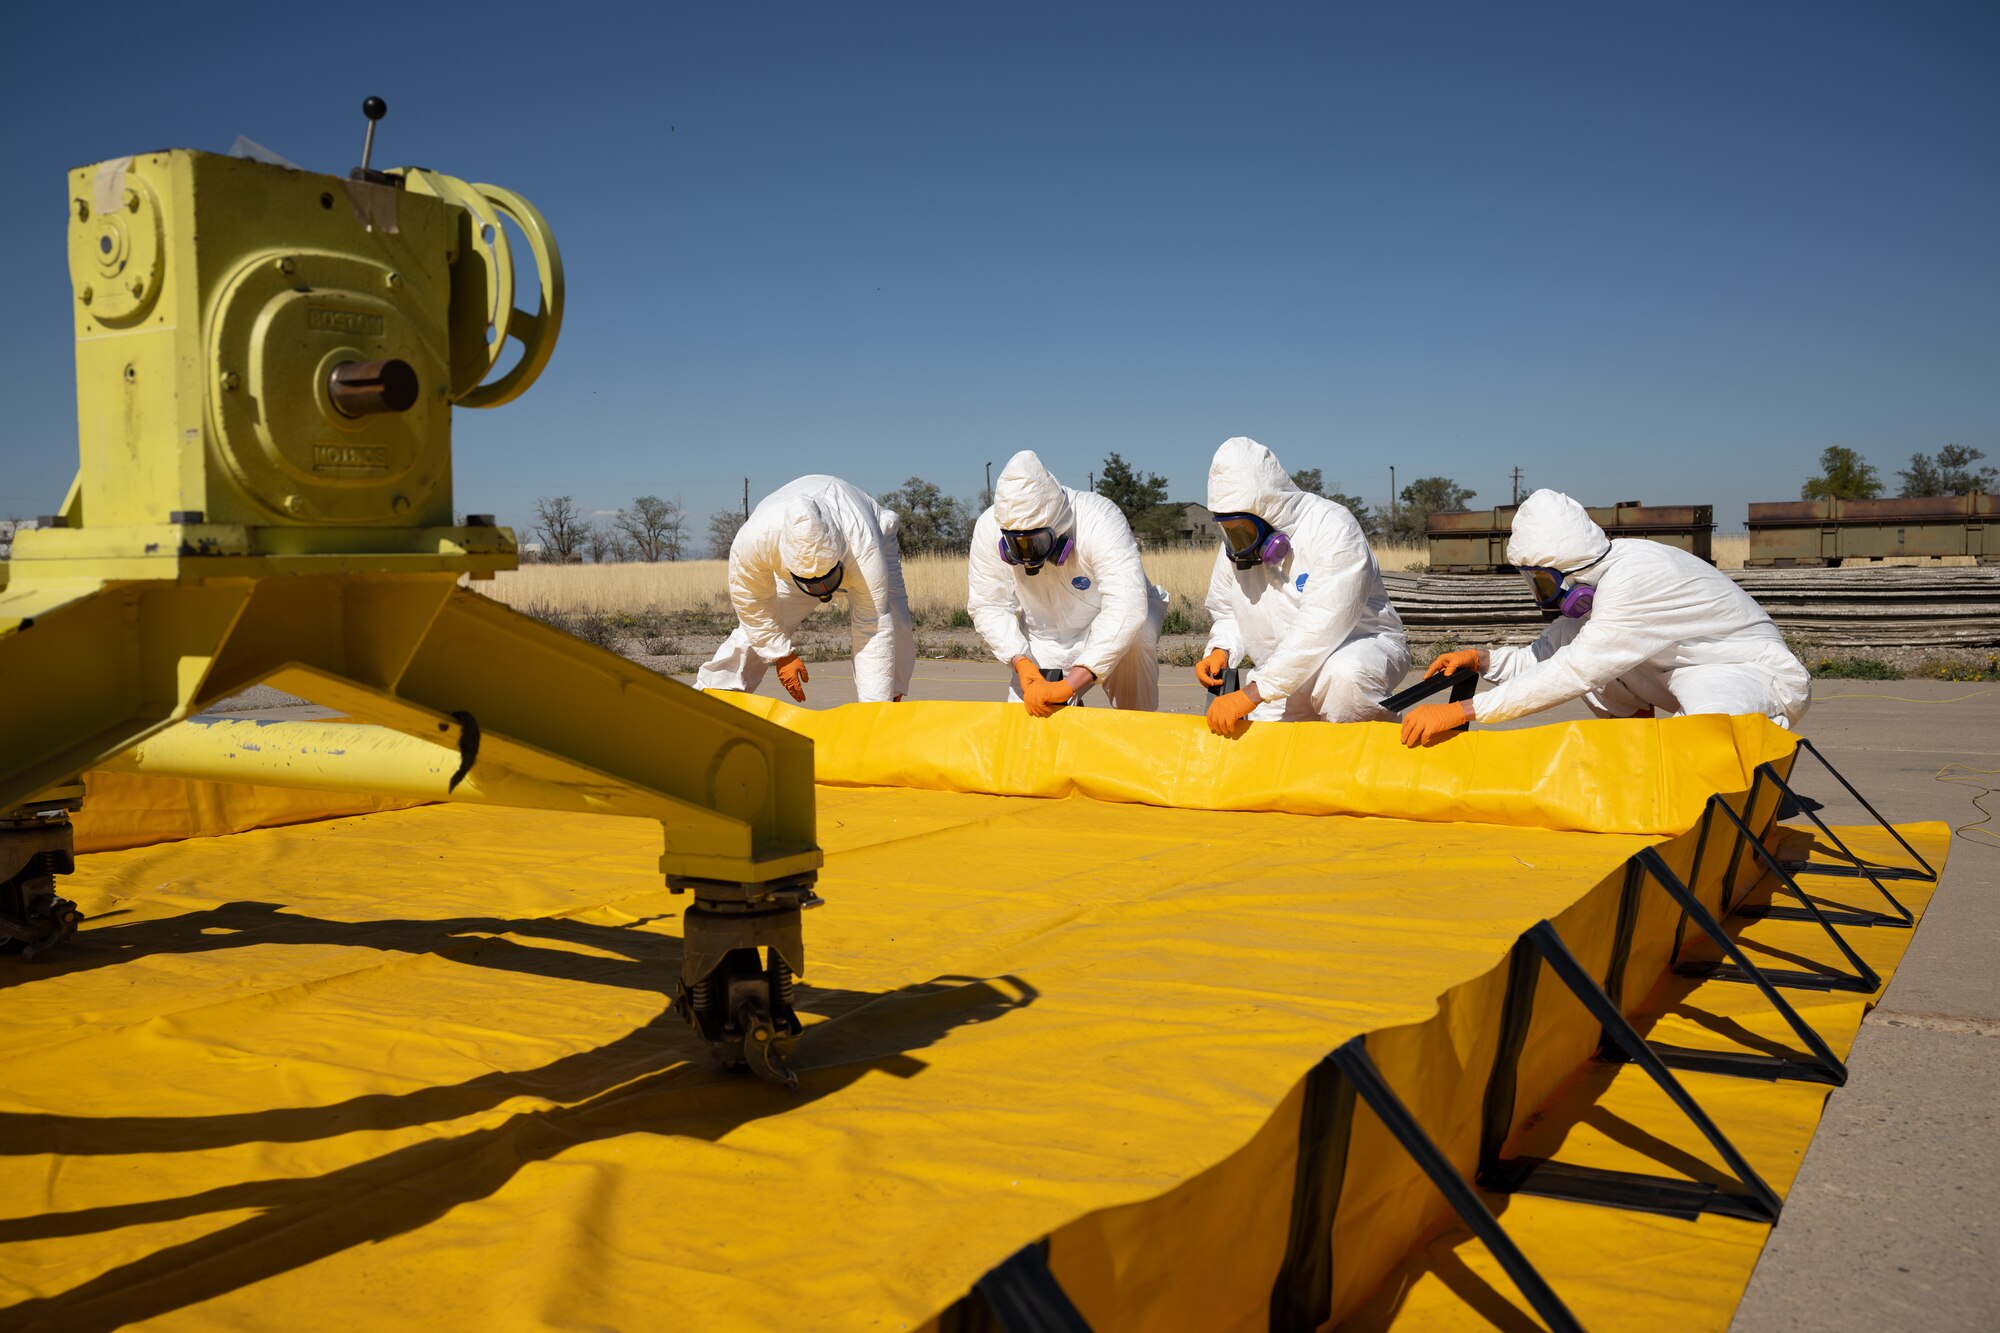 Members of the Missile Mishap Response Team erect a containment barrier during a training event at Hill Air Force Base, Utah, Oct. 4, 2022.